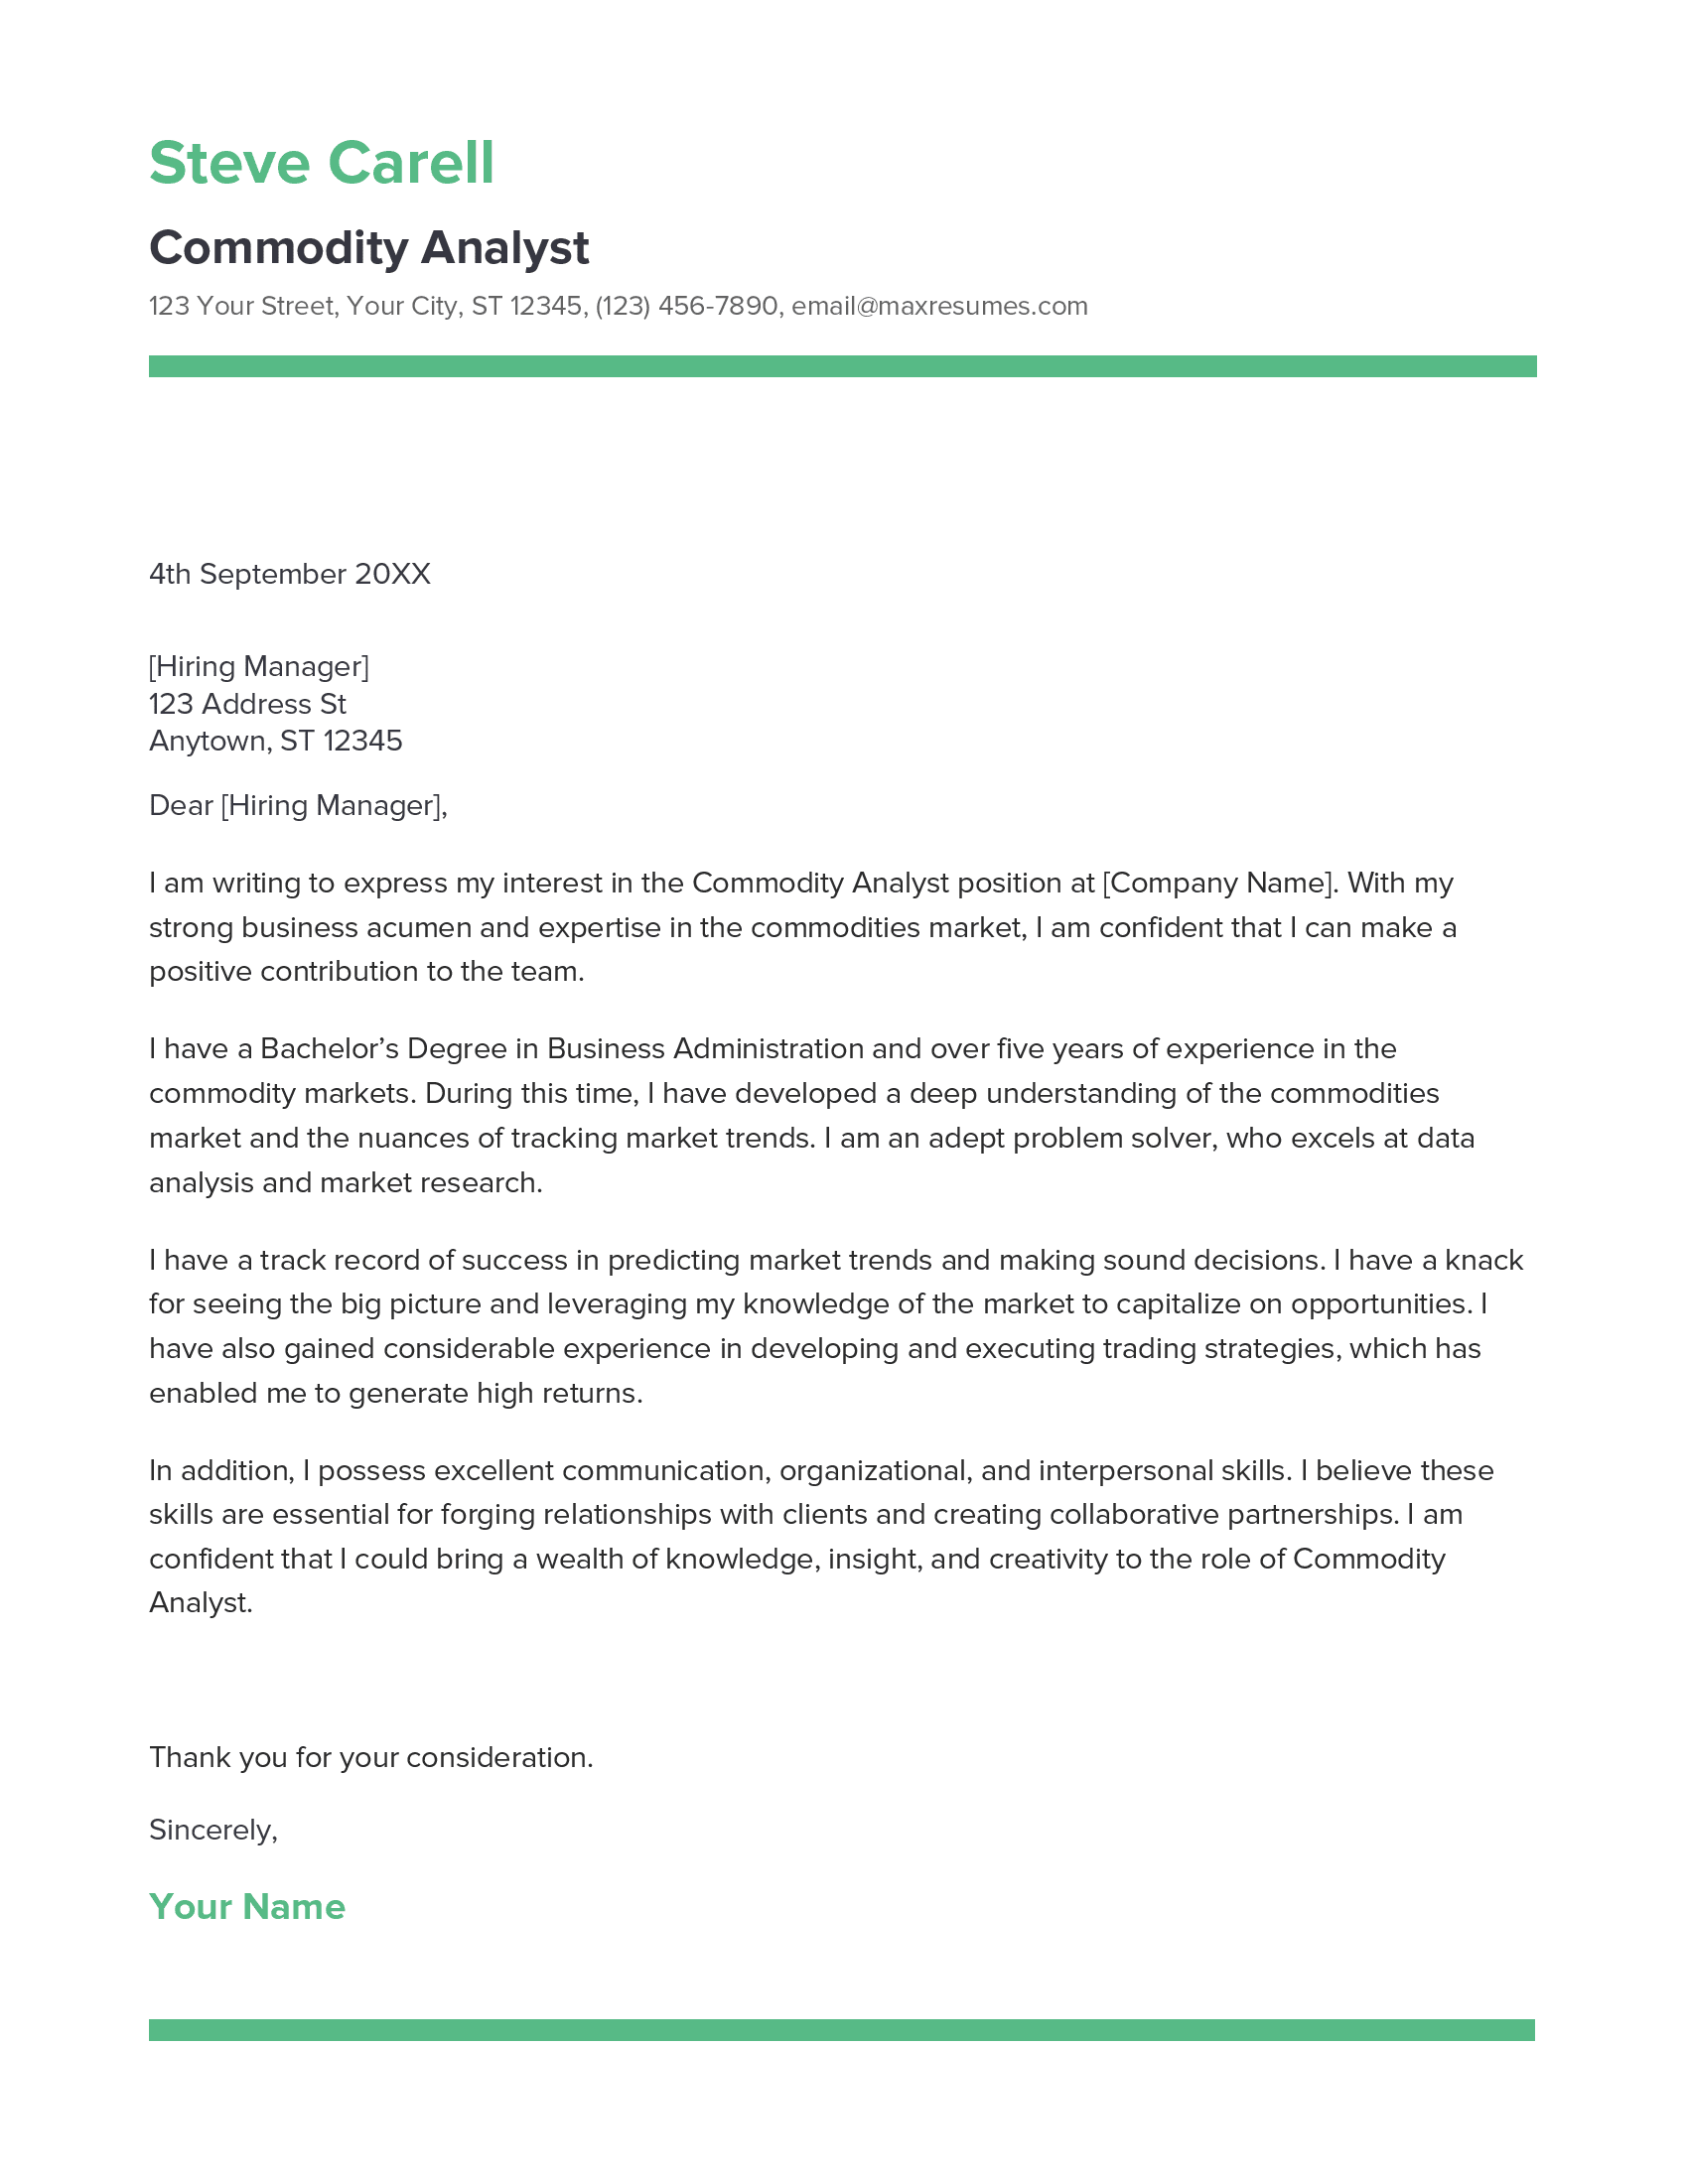 Commodity Analyst Cover Letter Example